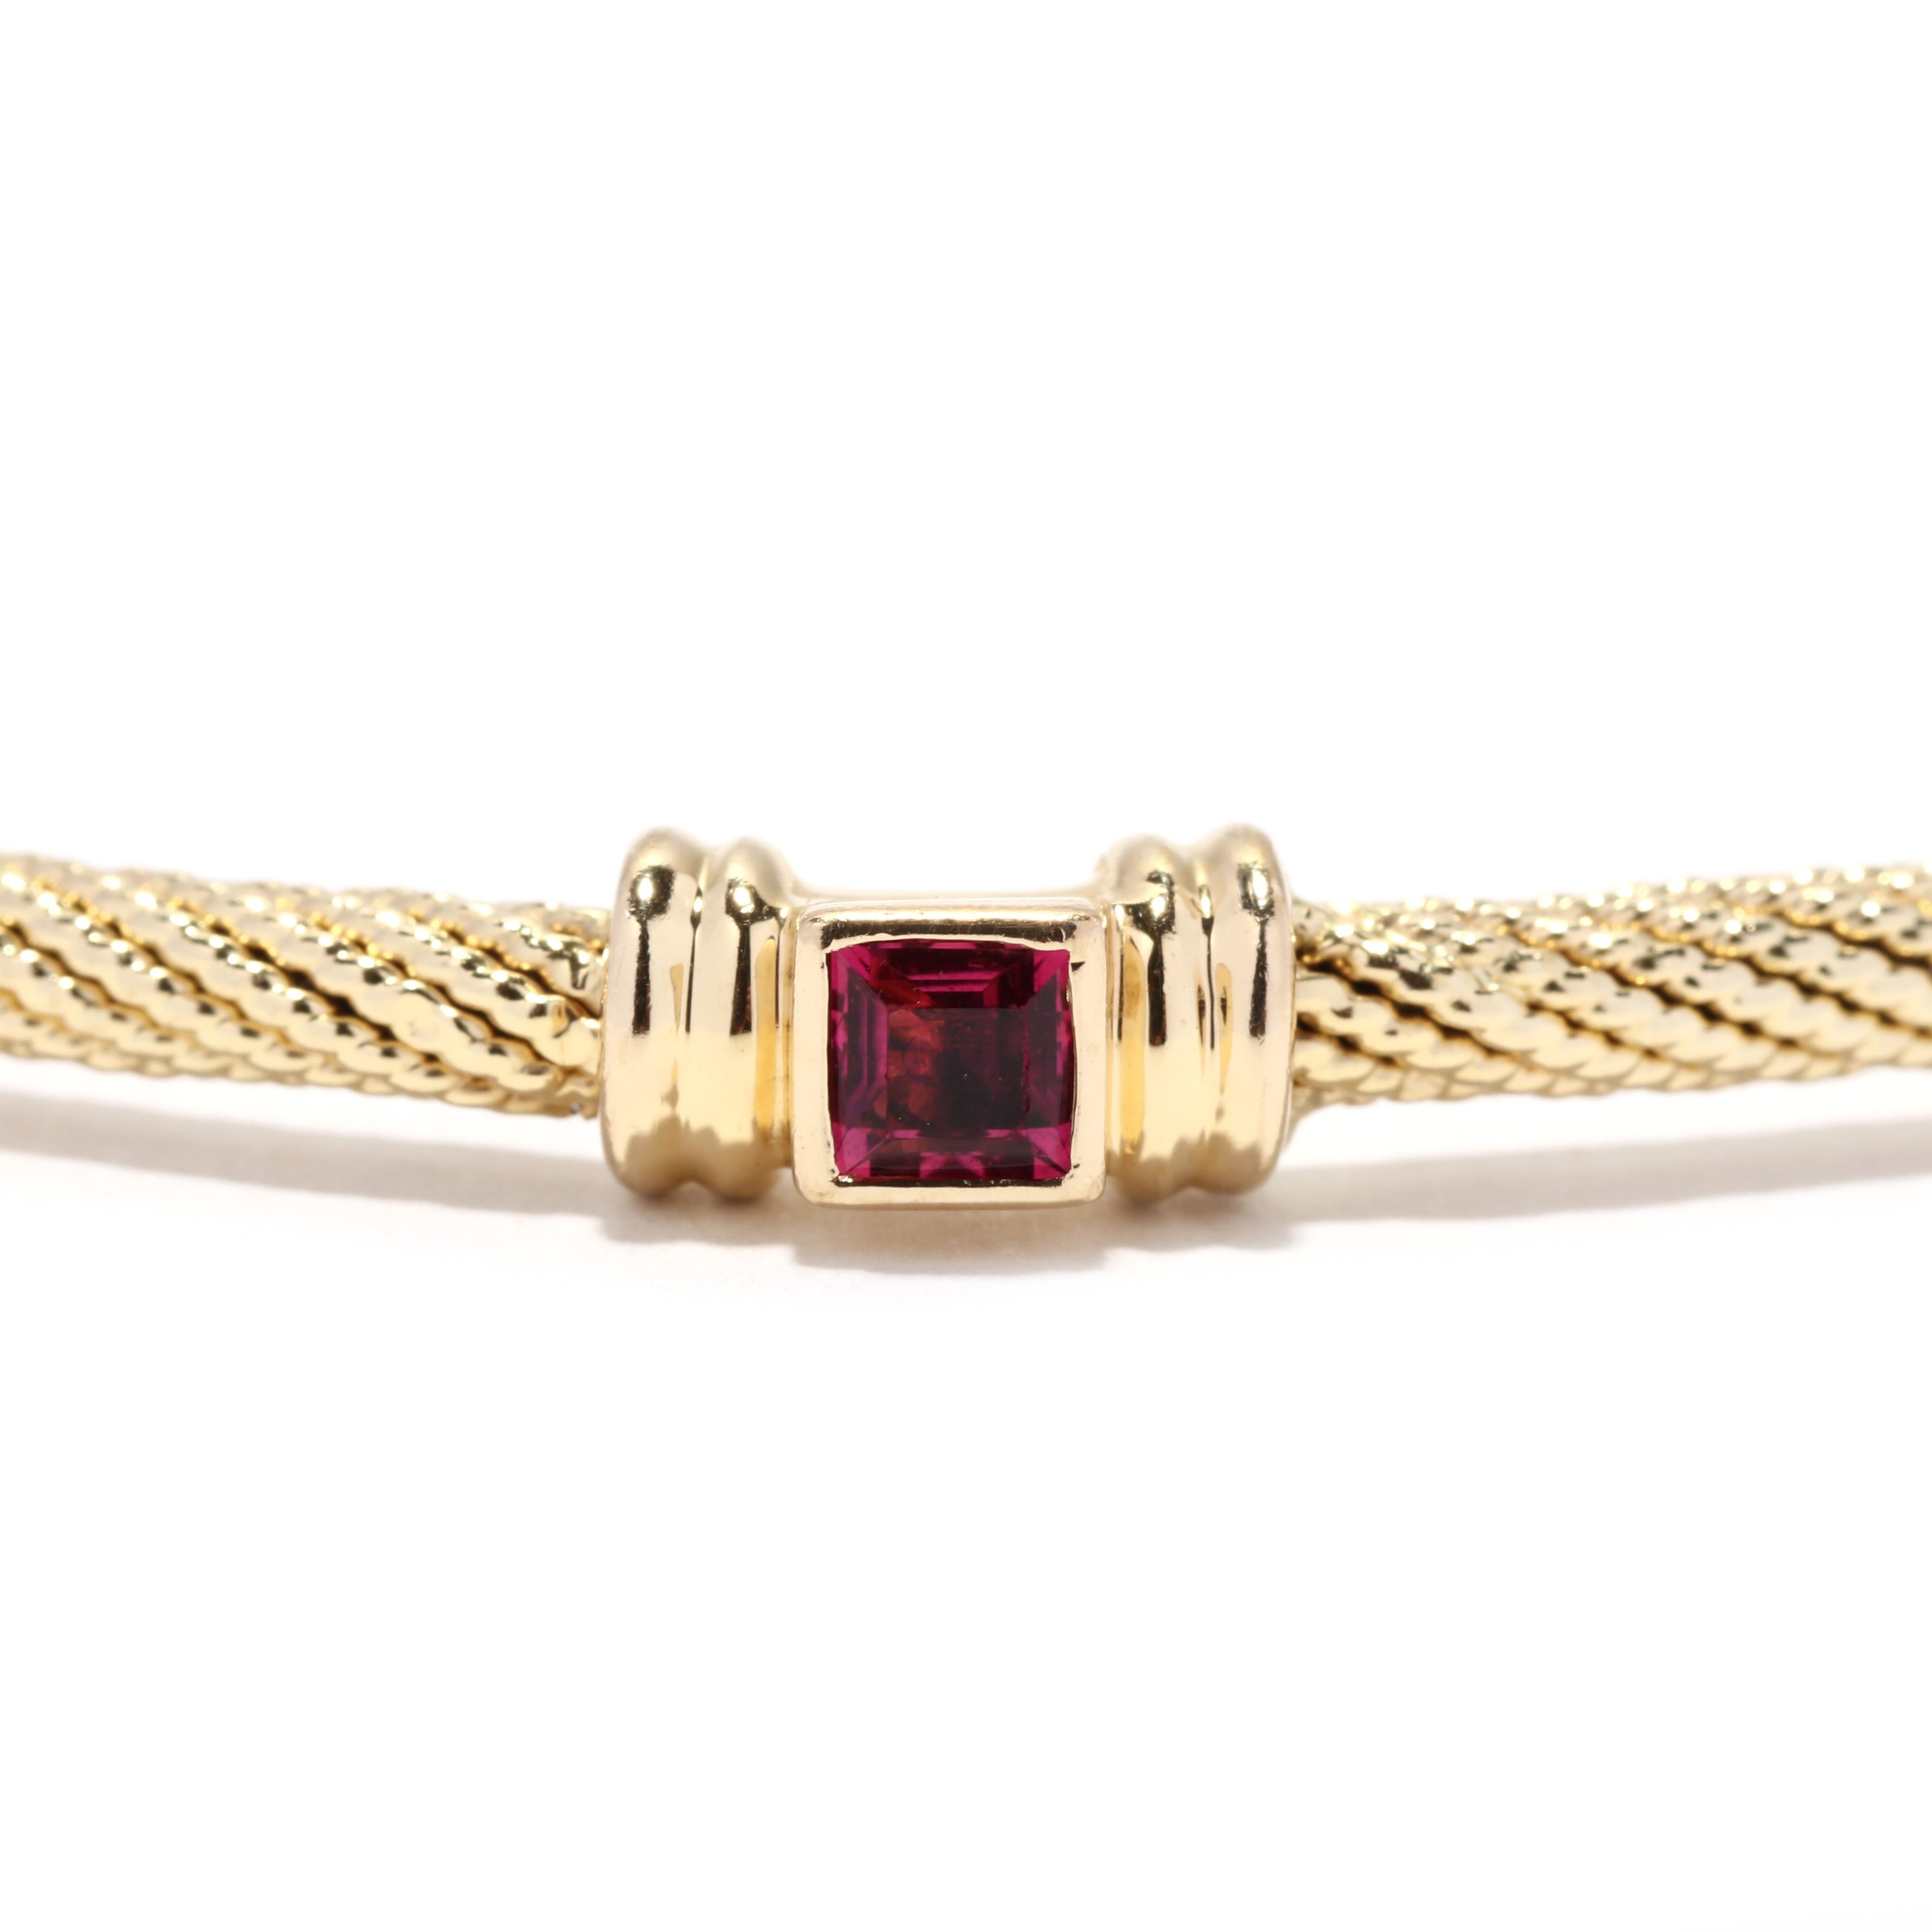 A vintage David Yurman 18 karat yellow gold pink tourmaline cable bangle bracelet. This vintage gold bangle feature a cable twist design with three stations set with square cabochon cut pink tourmalines weighing approximately .75 total